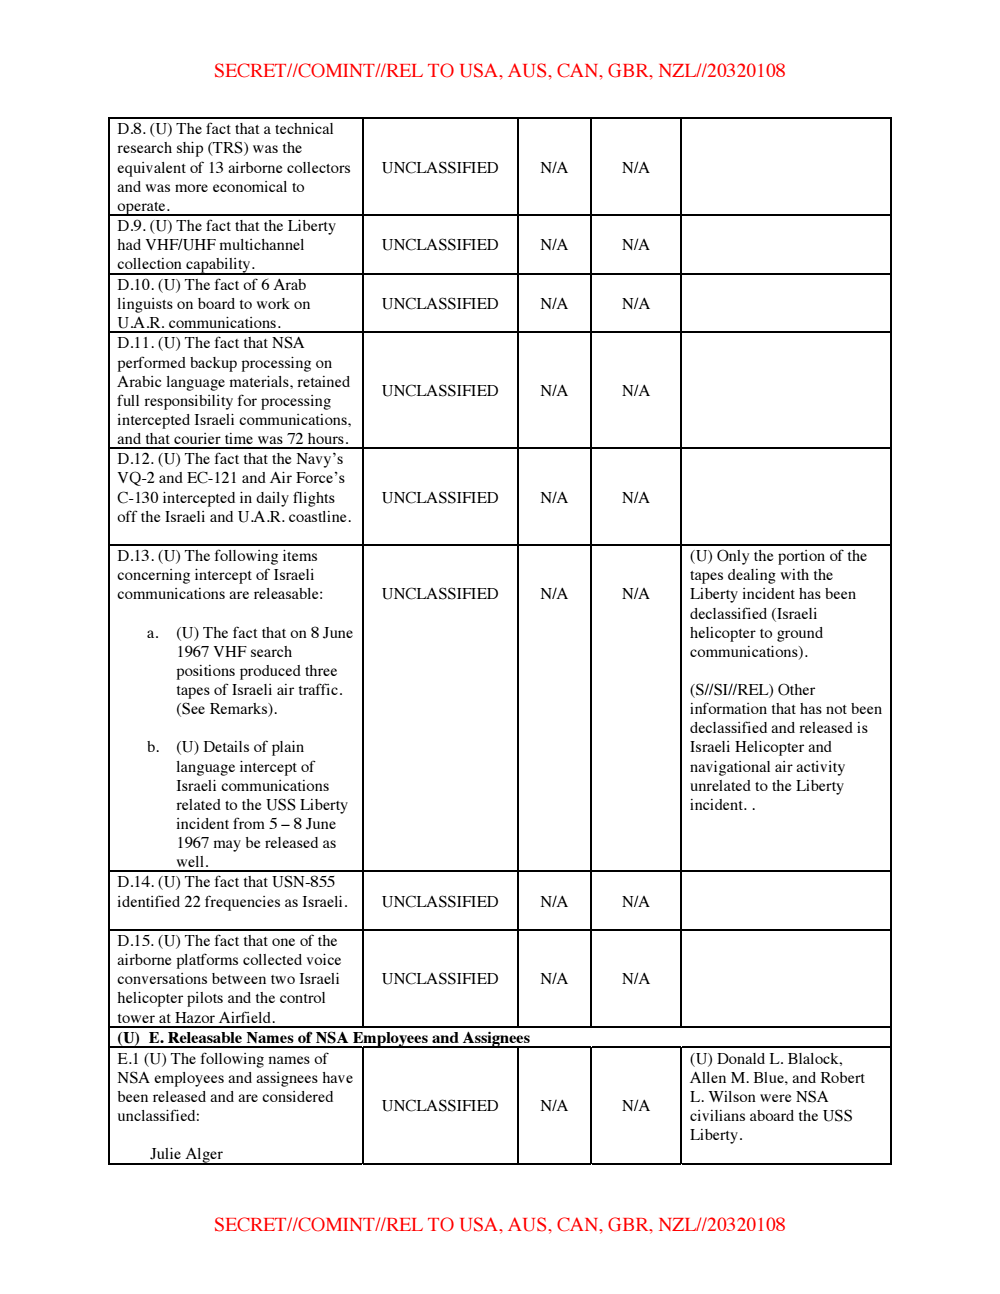 Page 9 from NSA’s USS Liberty Incident Classification Guide